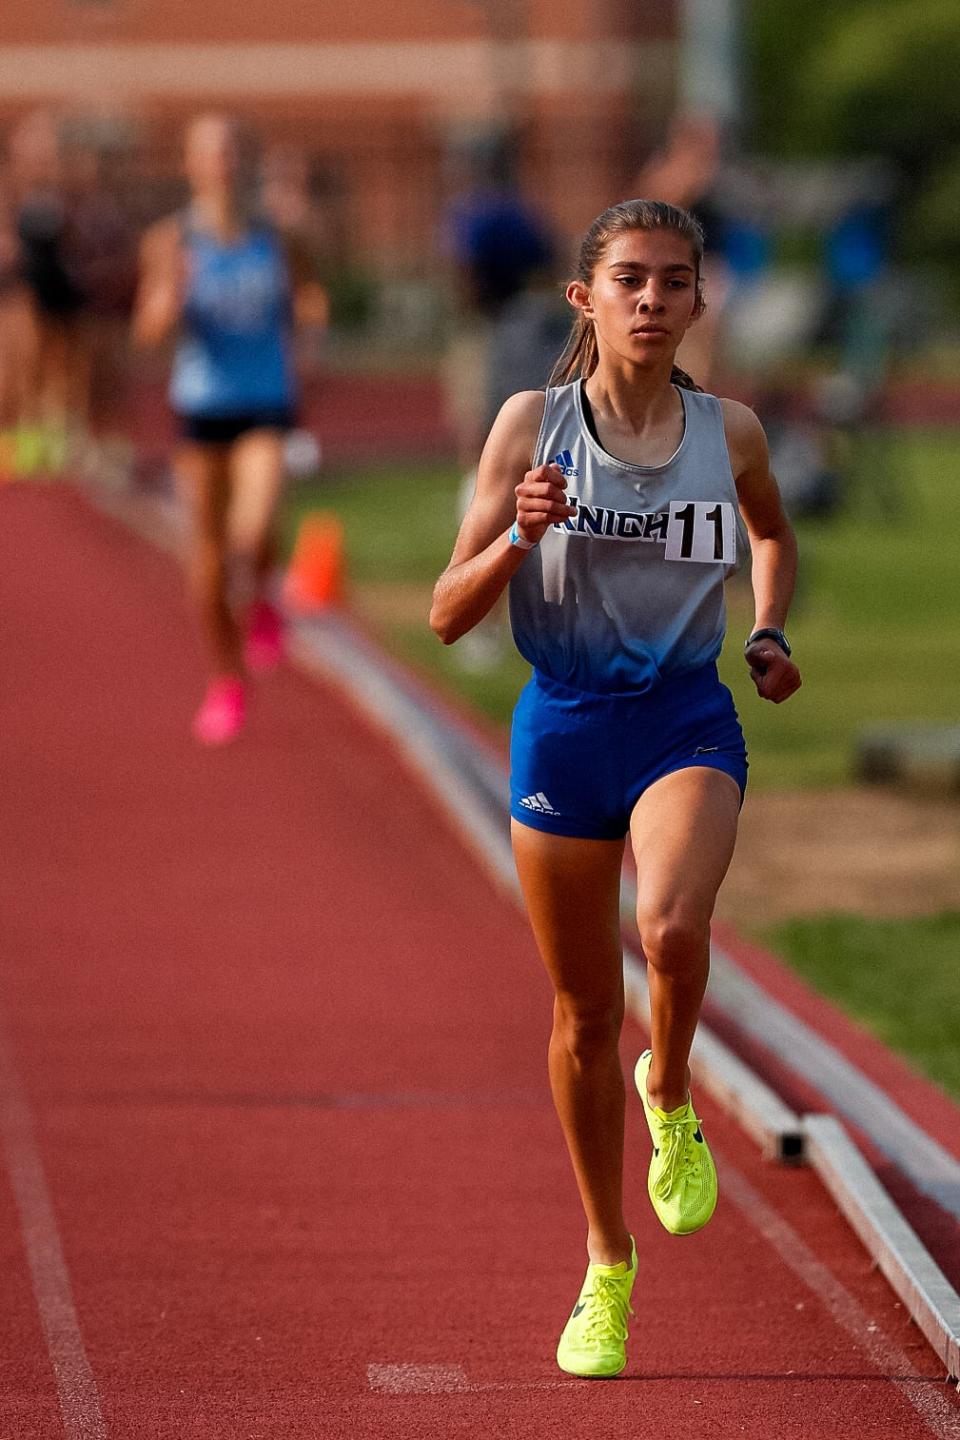 Nolensville's Claire Stegall, who broke a state record in the 1,600-meter run en route to a state title, is a TSWA all-state member.